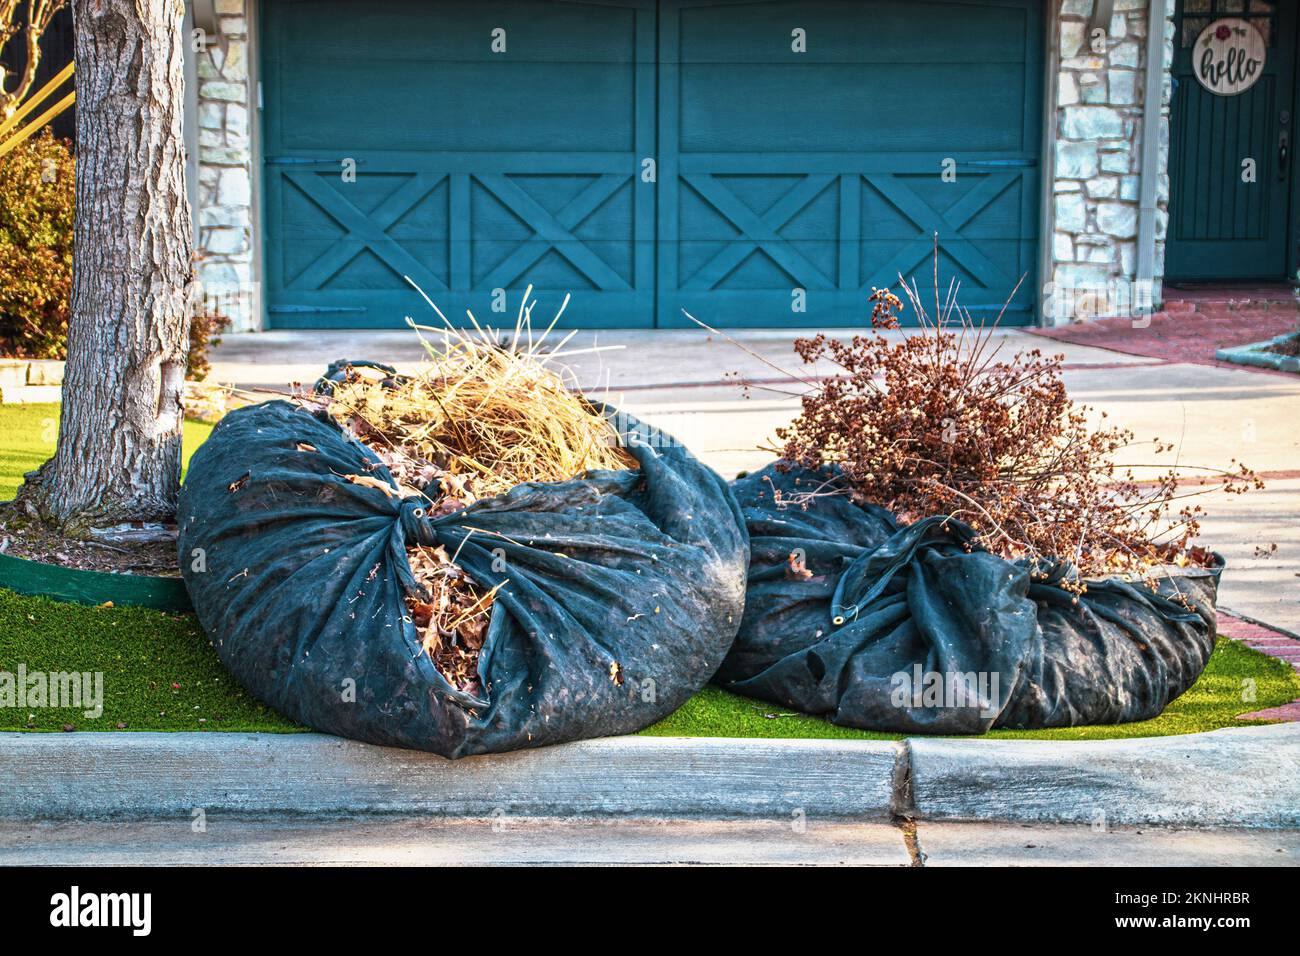 Yard clean-up - Two old tarps filled with weeds and dead tree debris sitting by curb in front of garage doors on articificial turf lawn Stock Photo